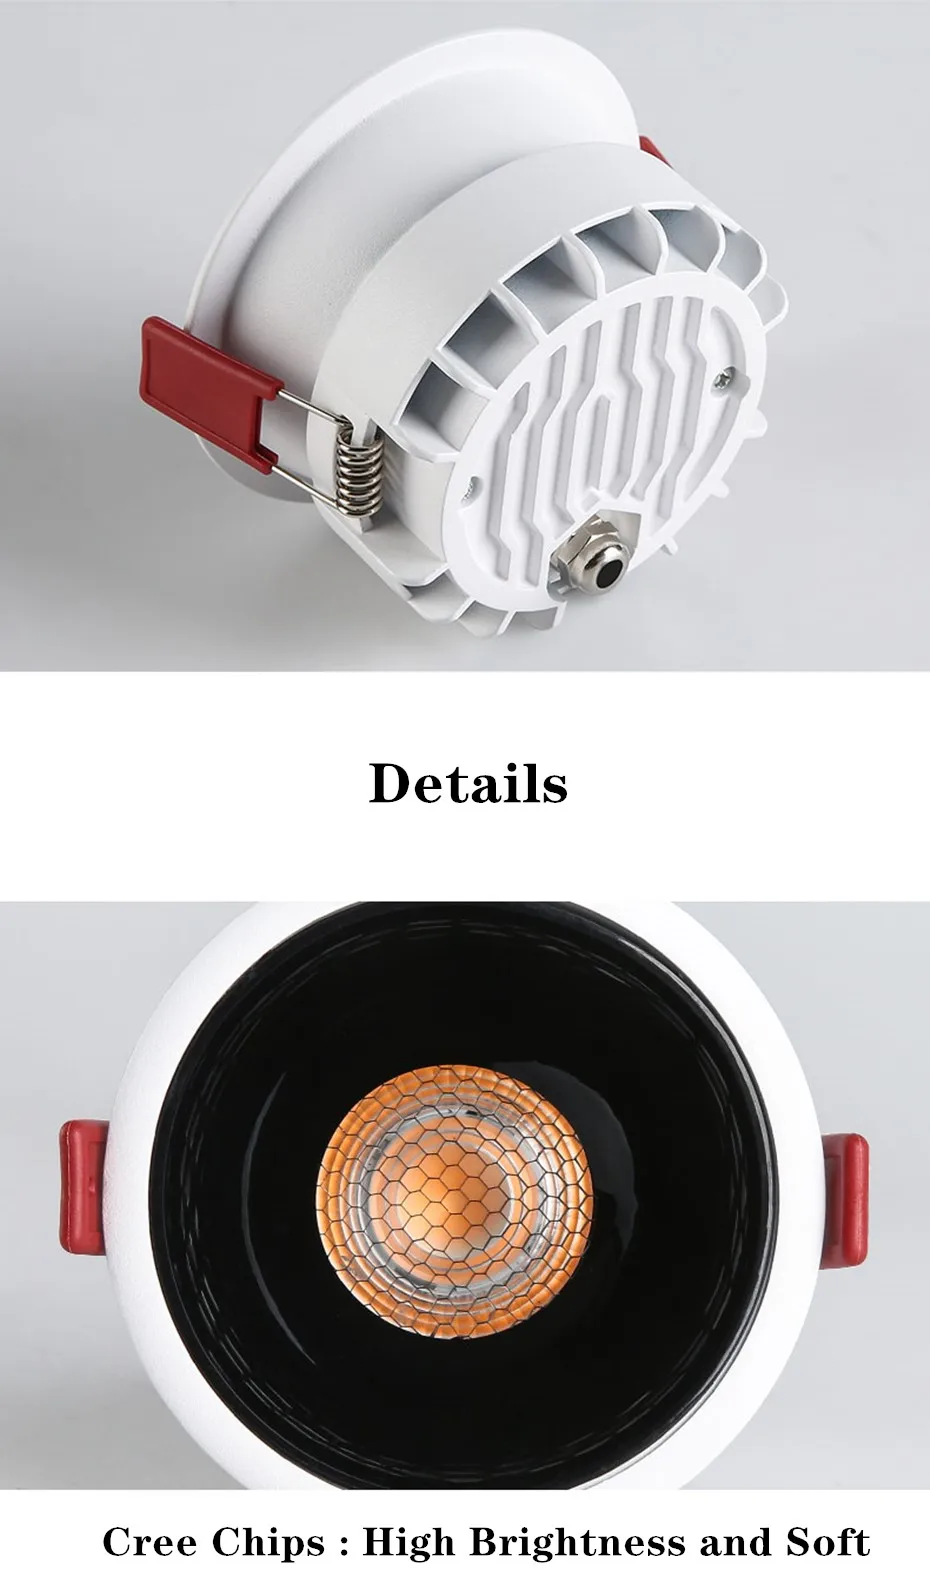 Dimmable AC110V-220V led Ceiling downlight 7W 12W 18W NO Glare LED Recessed Ceiling lamp Spot light For home illumination